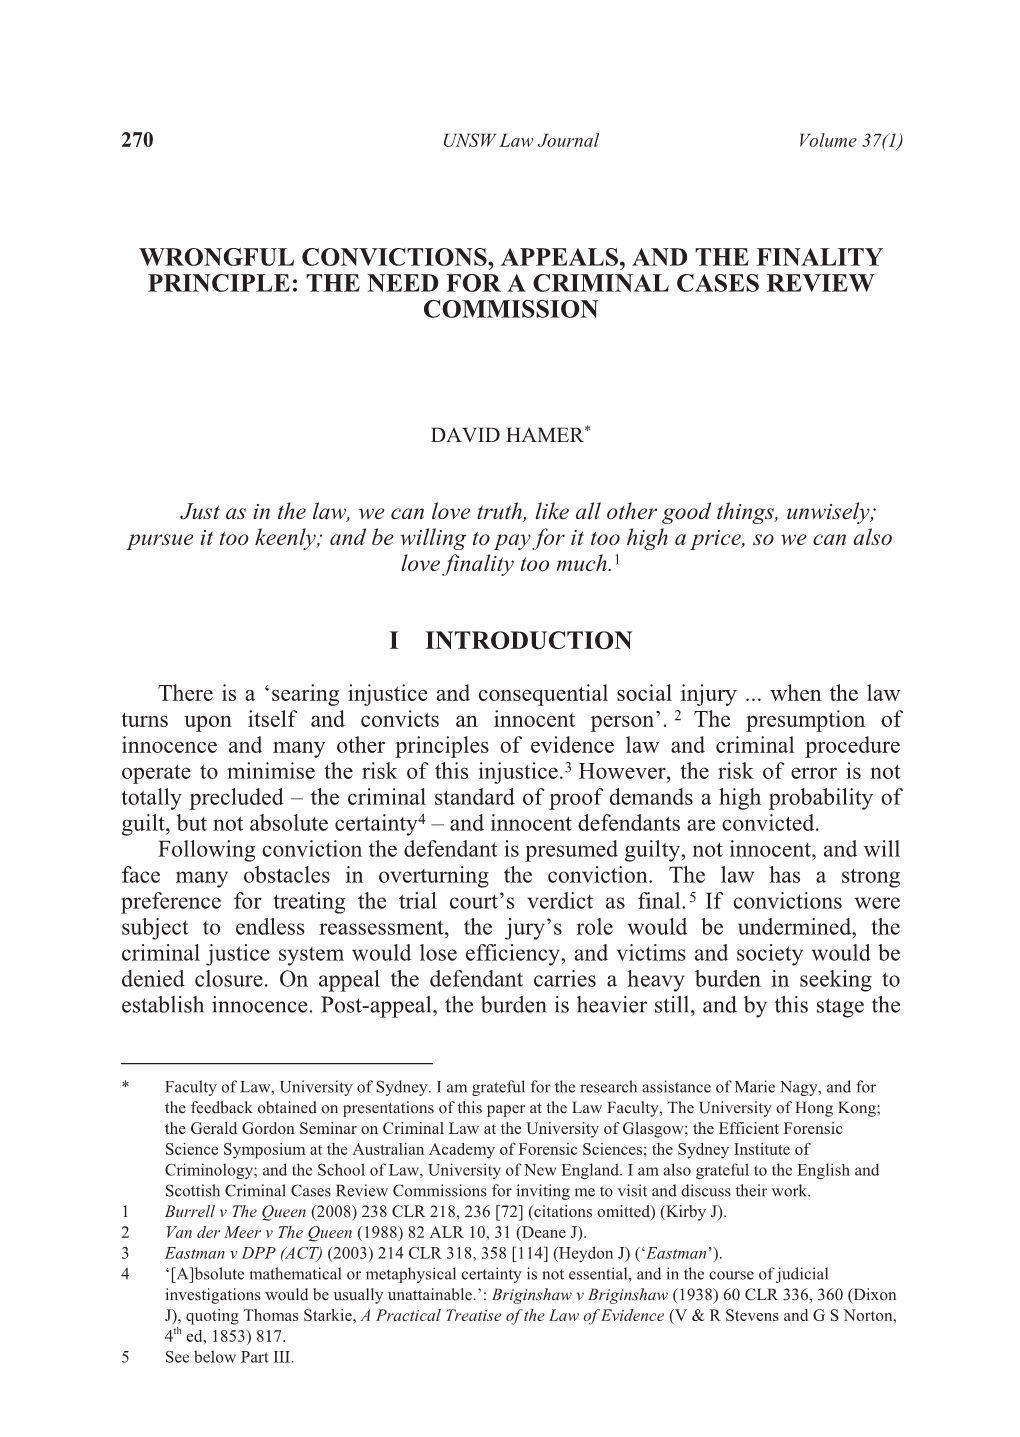 Wrongful Convictions, Appeals, and the Finality Principle: the Need for a Criminal Cases Review Commission